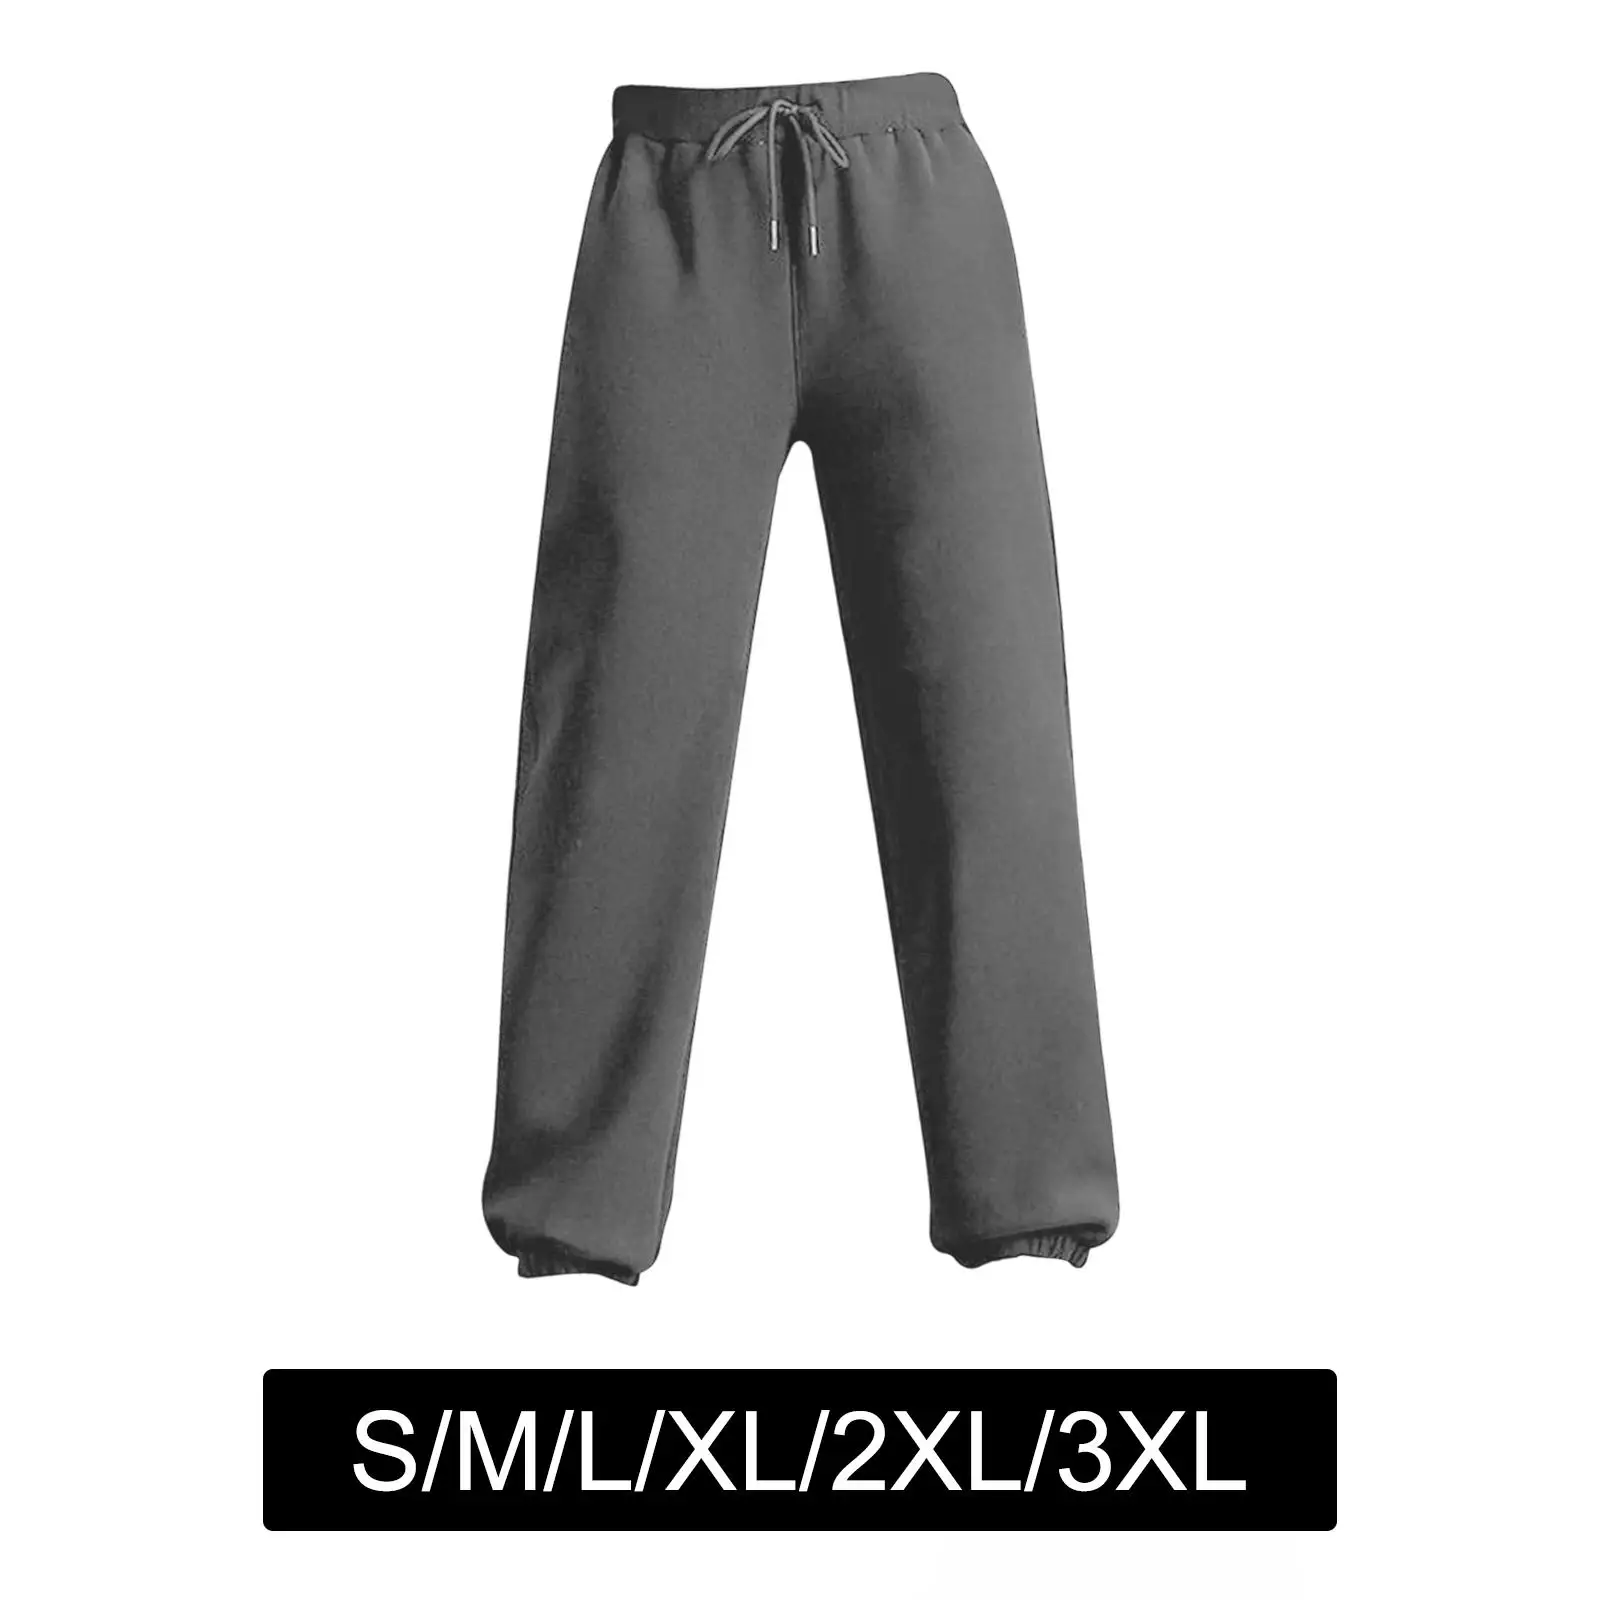 Plush Lined Sweatpants Jogger Pants with Pockets Home Dress Warm Casual Harem Trousers for Winter Sports Jogging Loose Fit Women